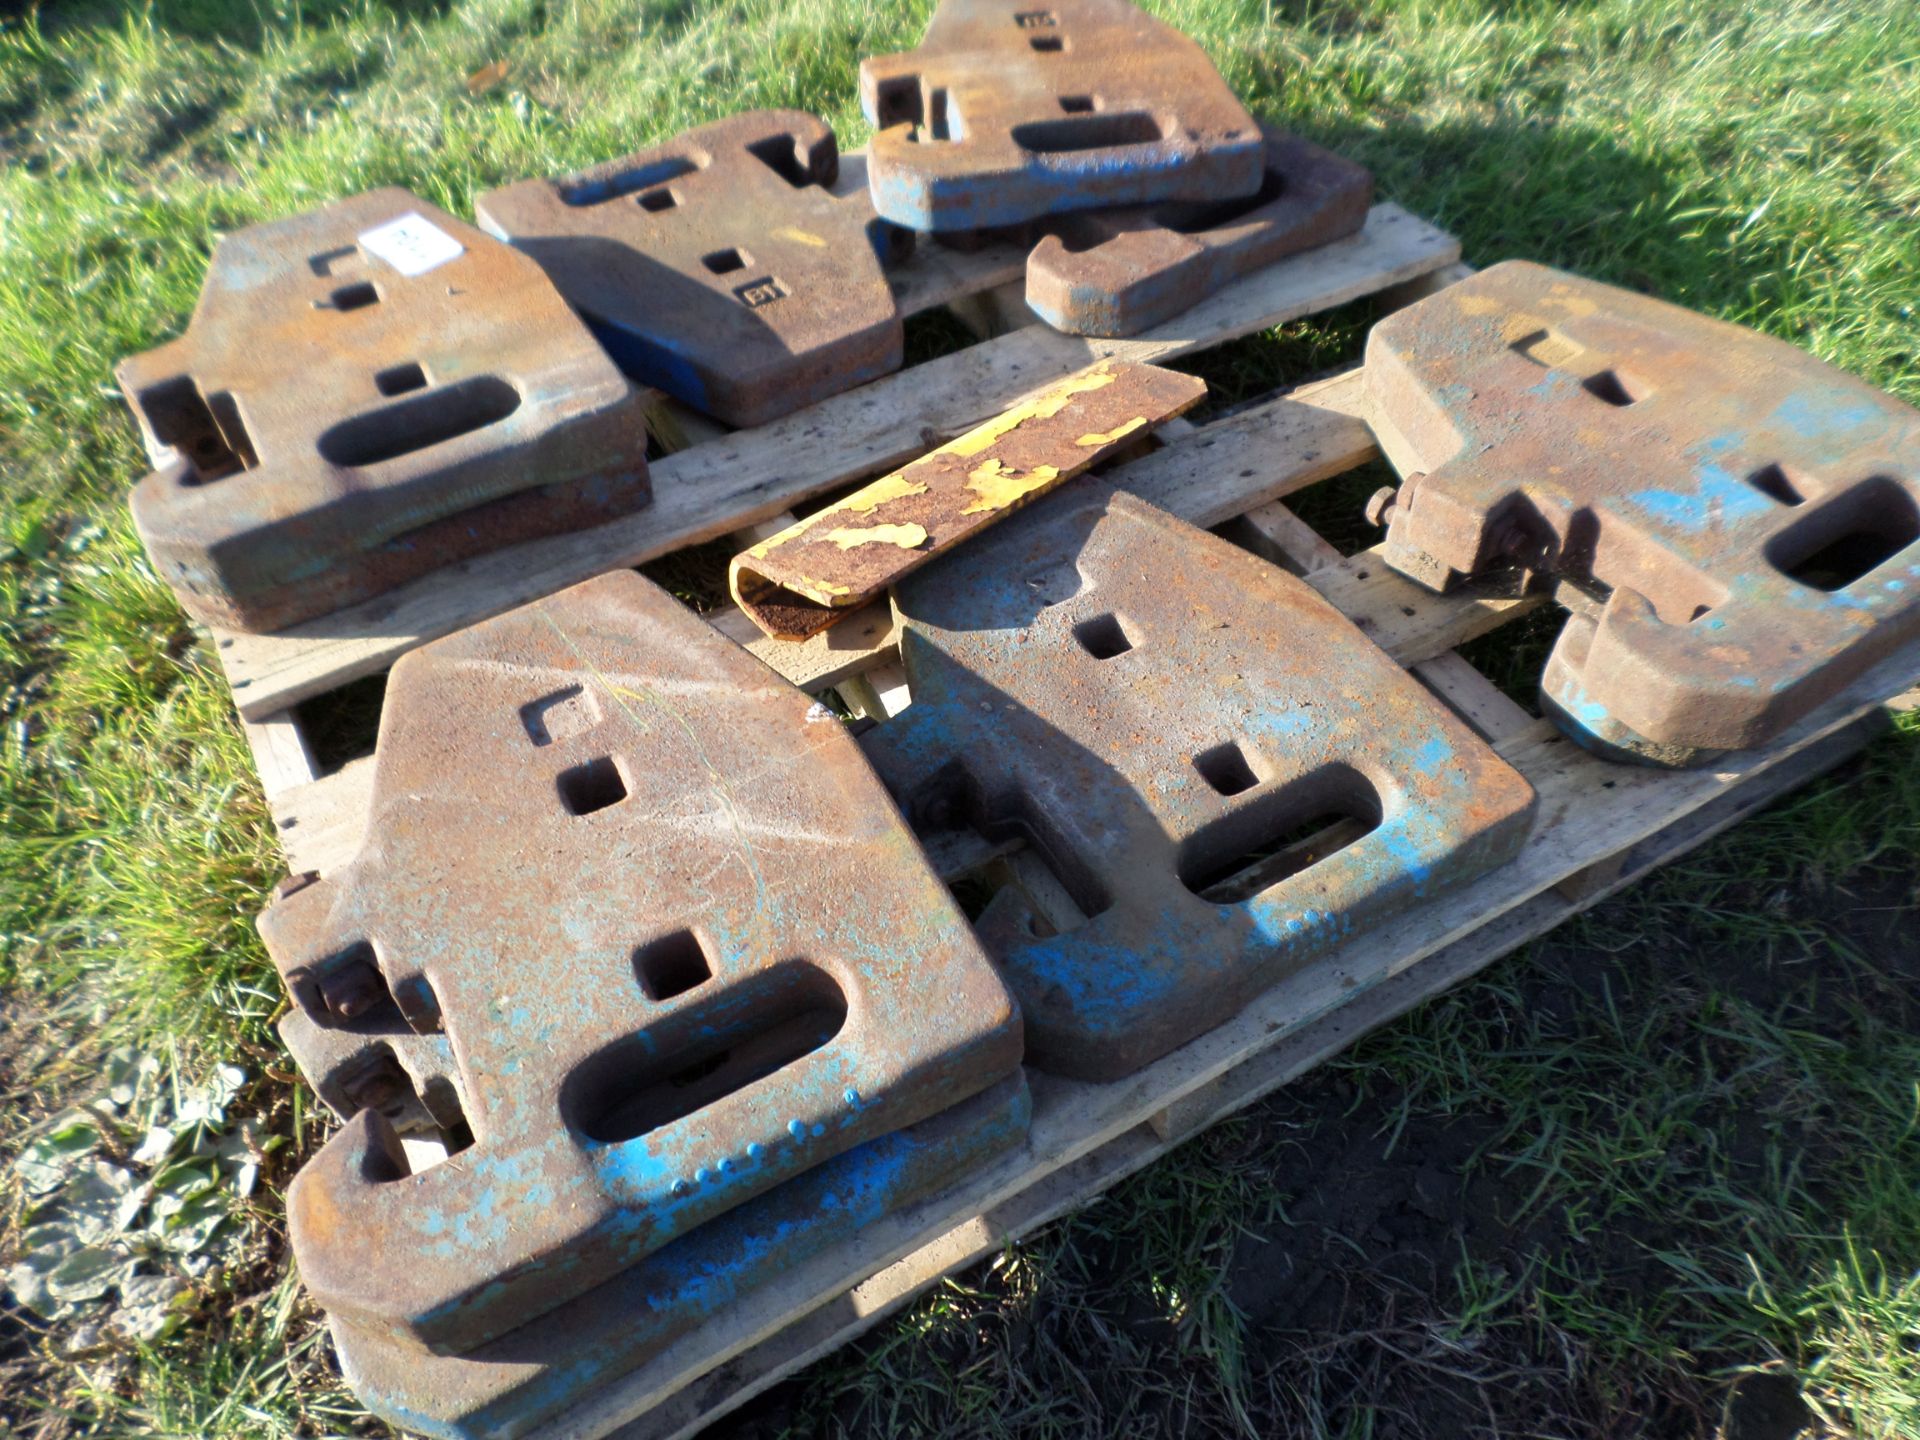 Ford tractor weights - Image 2 of 2